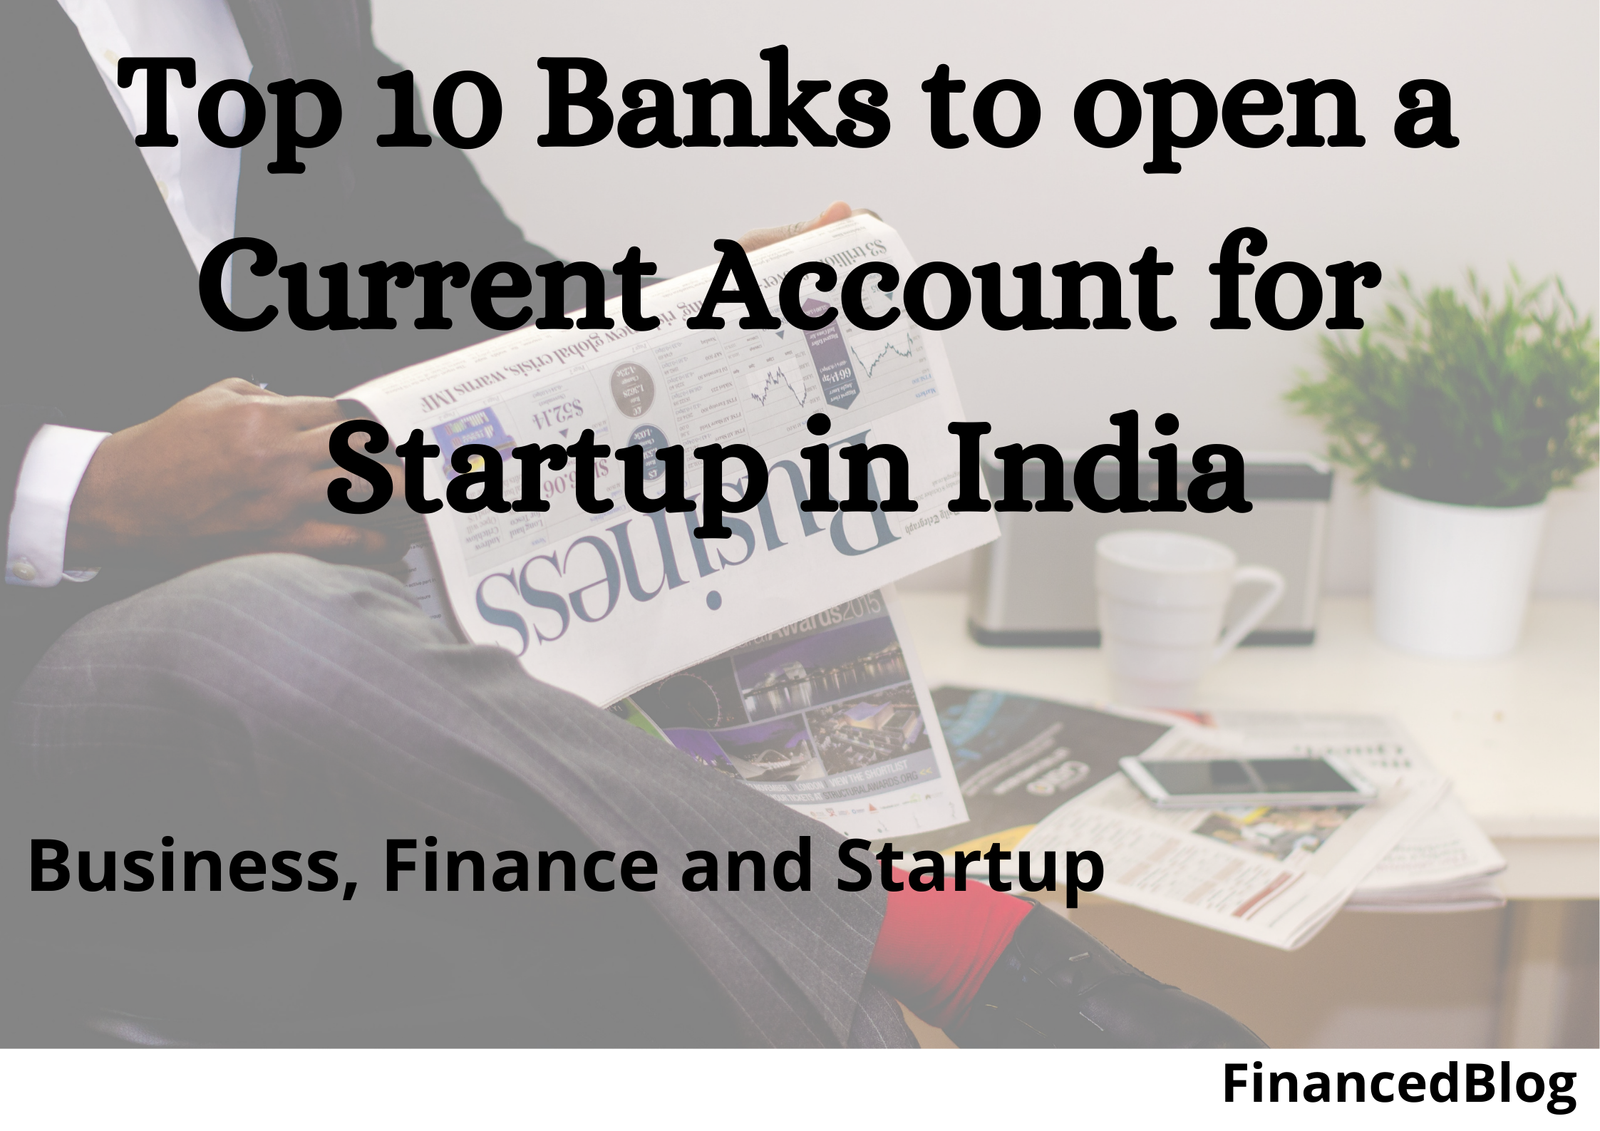 Top 10 Banks to open a Current Account for Startup in India